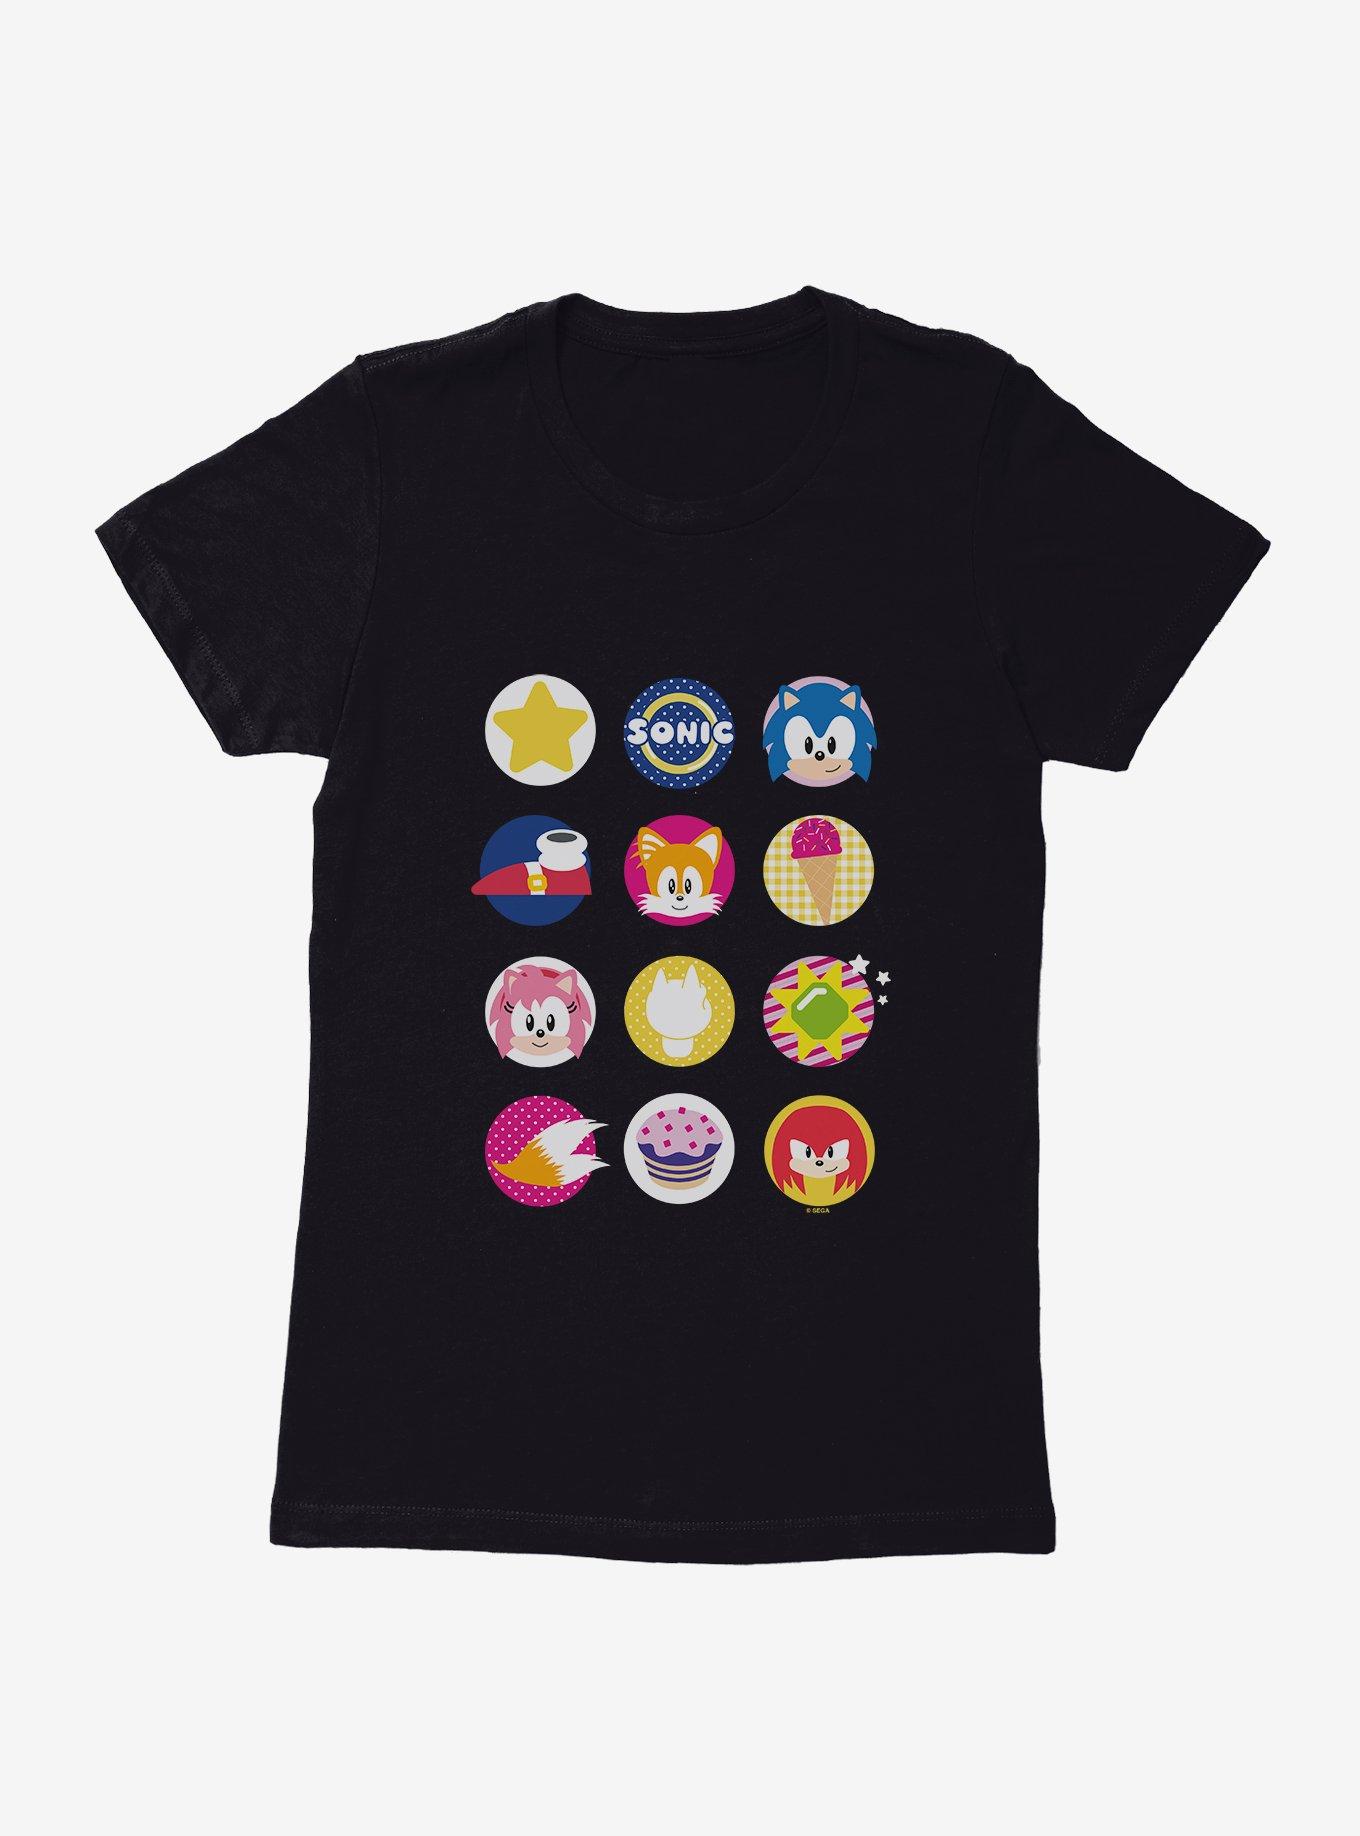 Sonic The Hedgehog Sonic And Friends Icons Womens T-Shirt, BLACK, hi-res